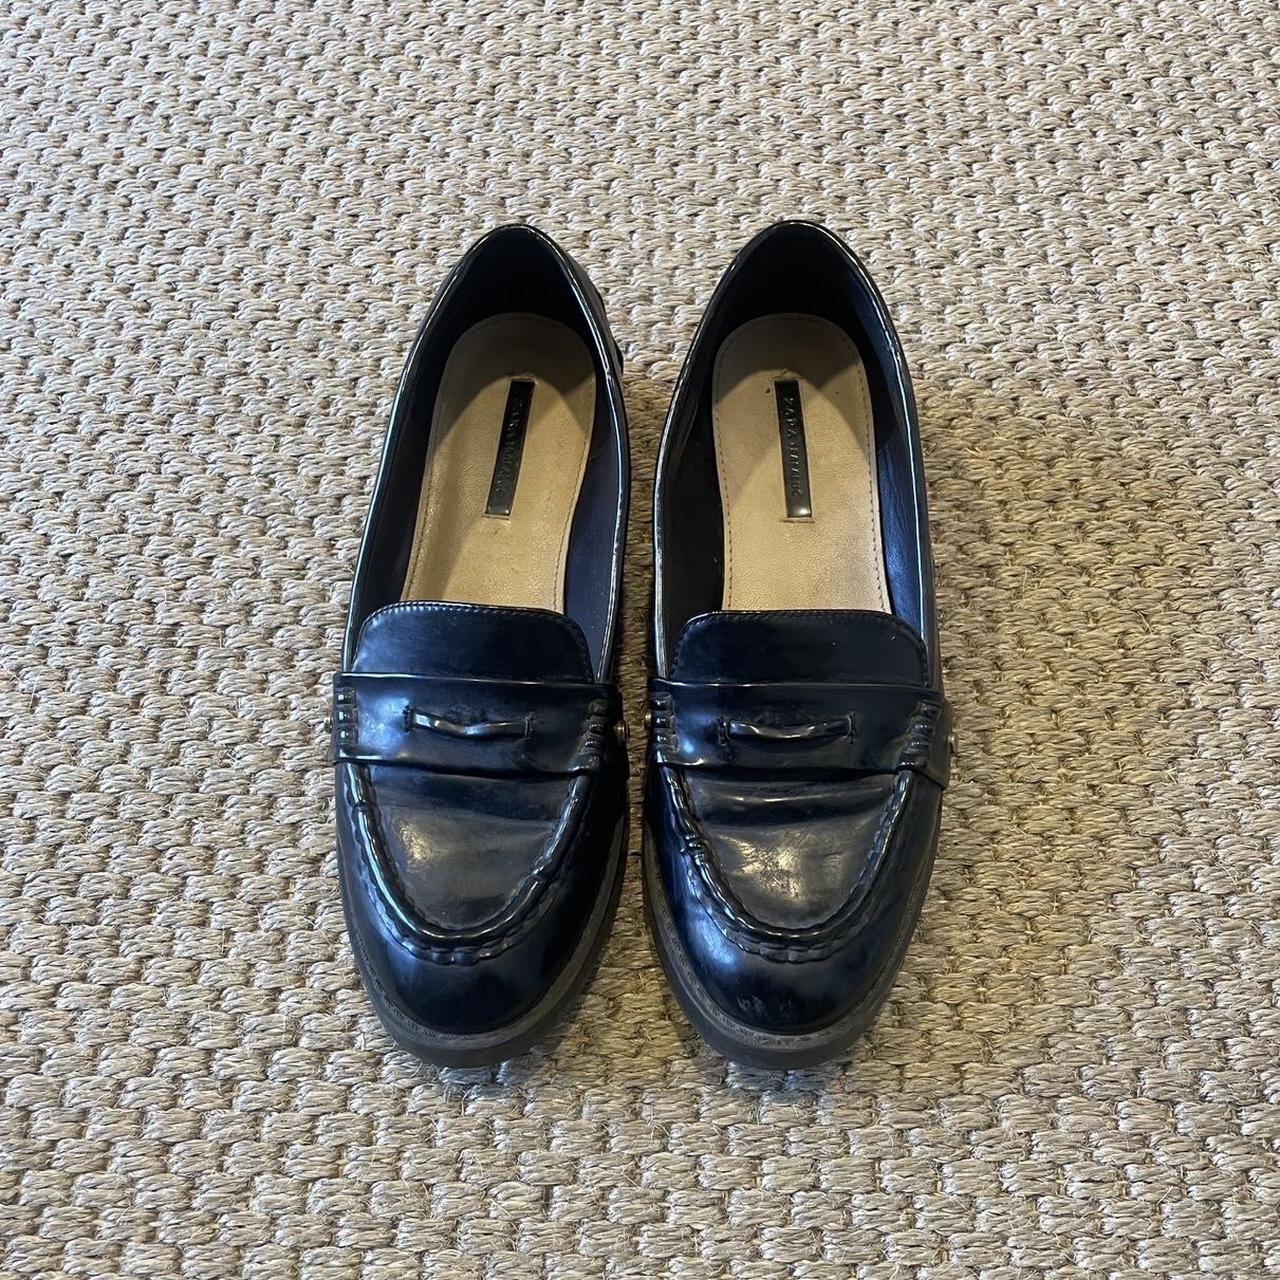 Penny Loafers in Black Good condition Size EU 37 - Depop